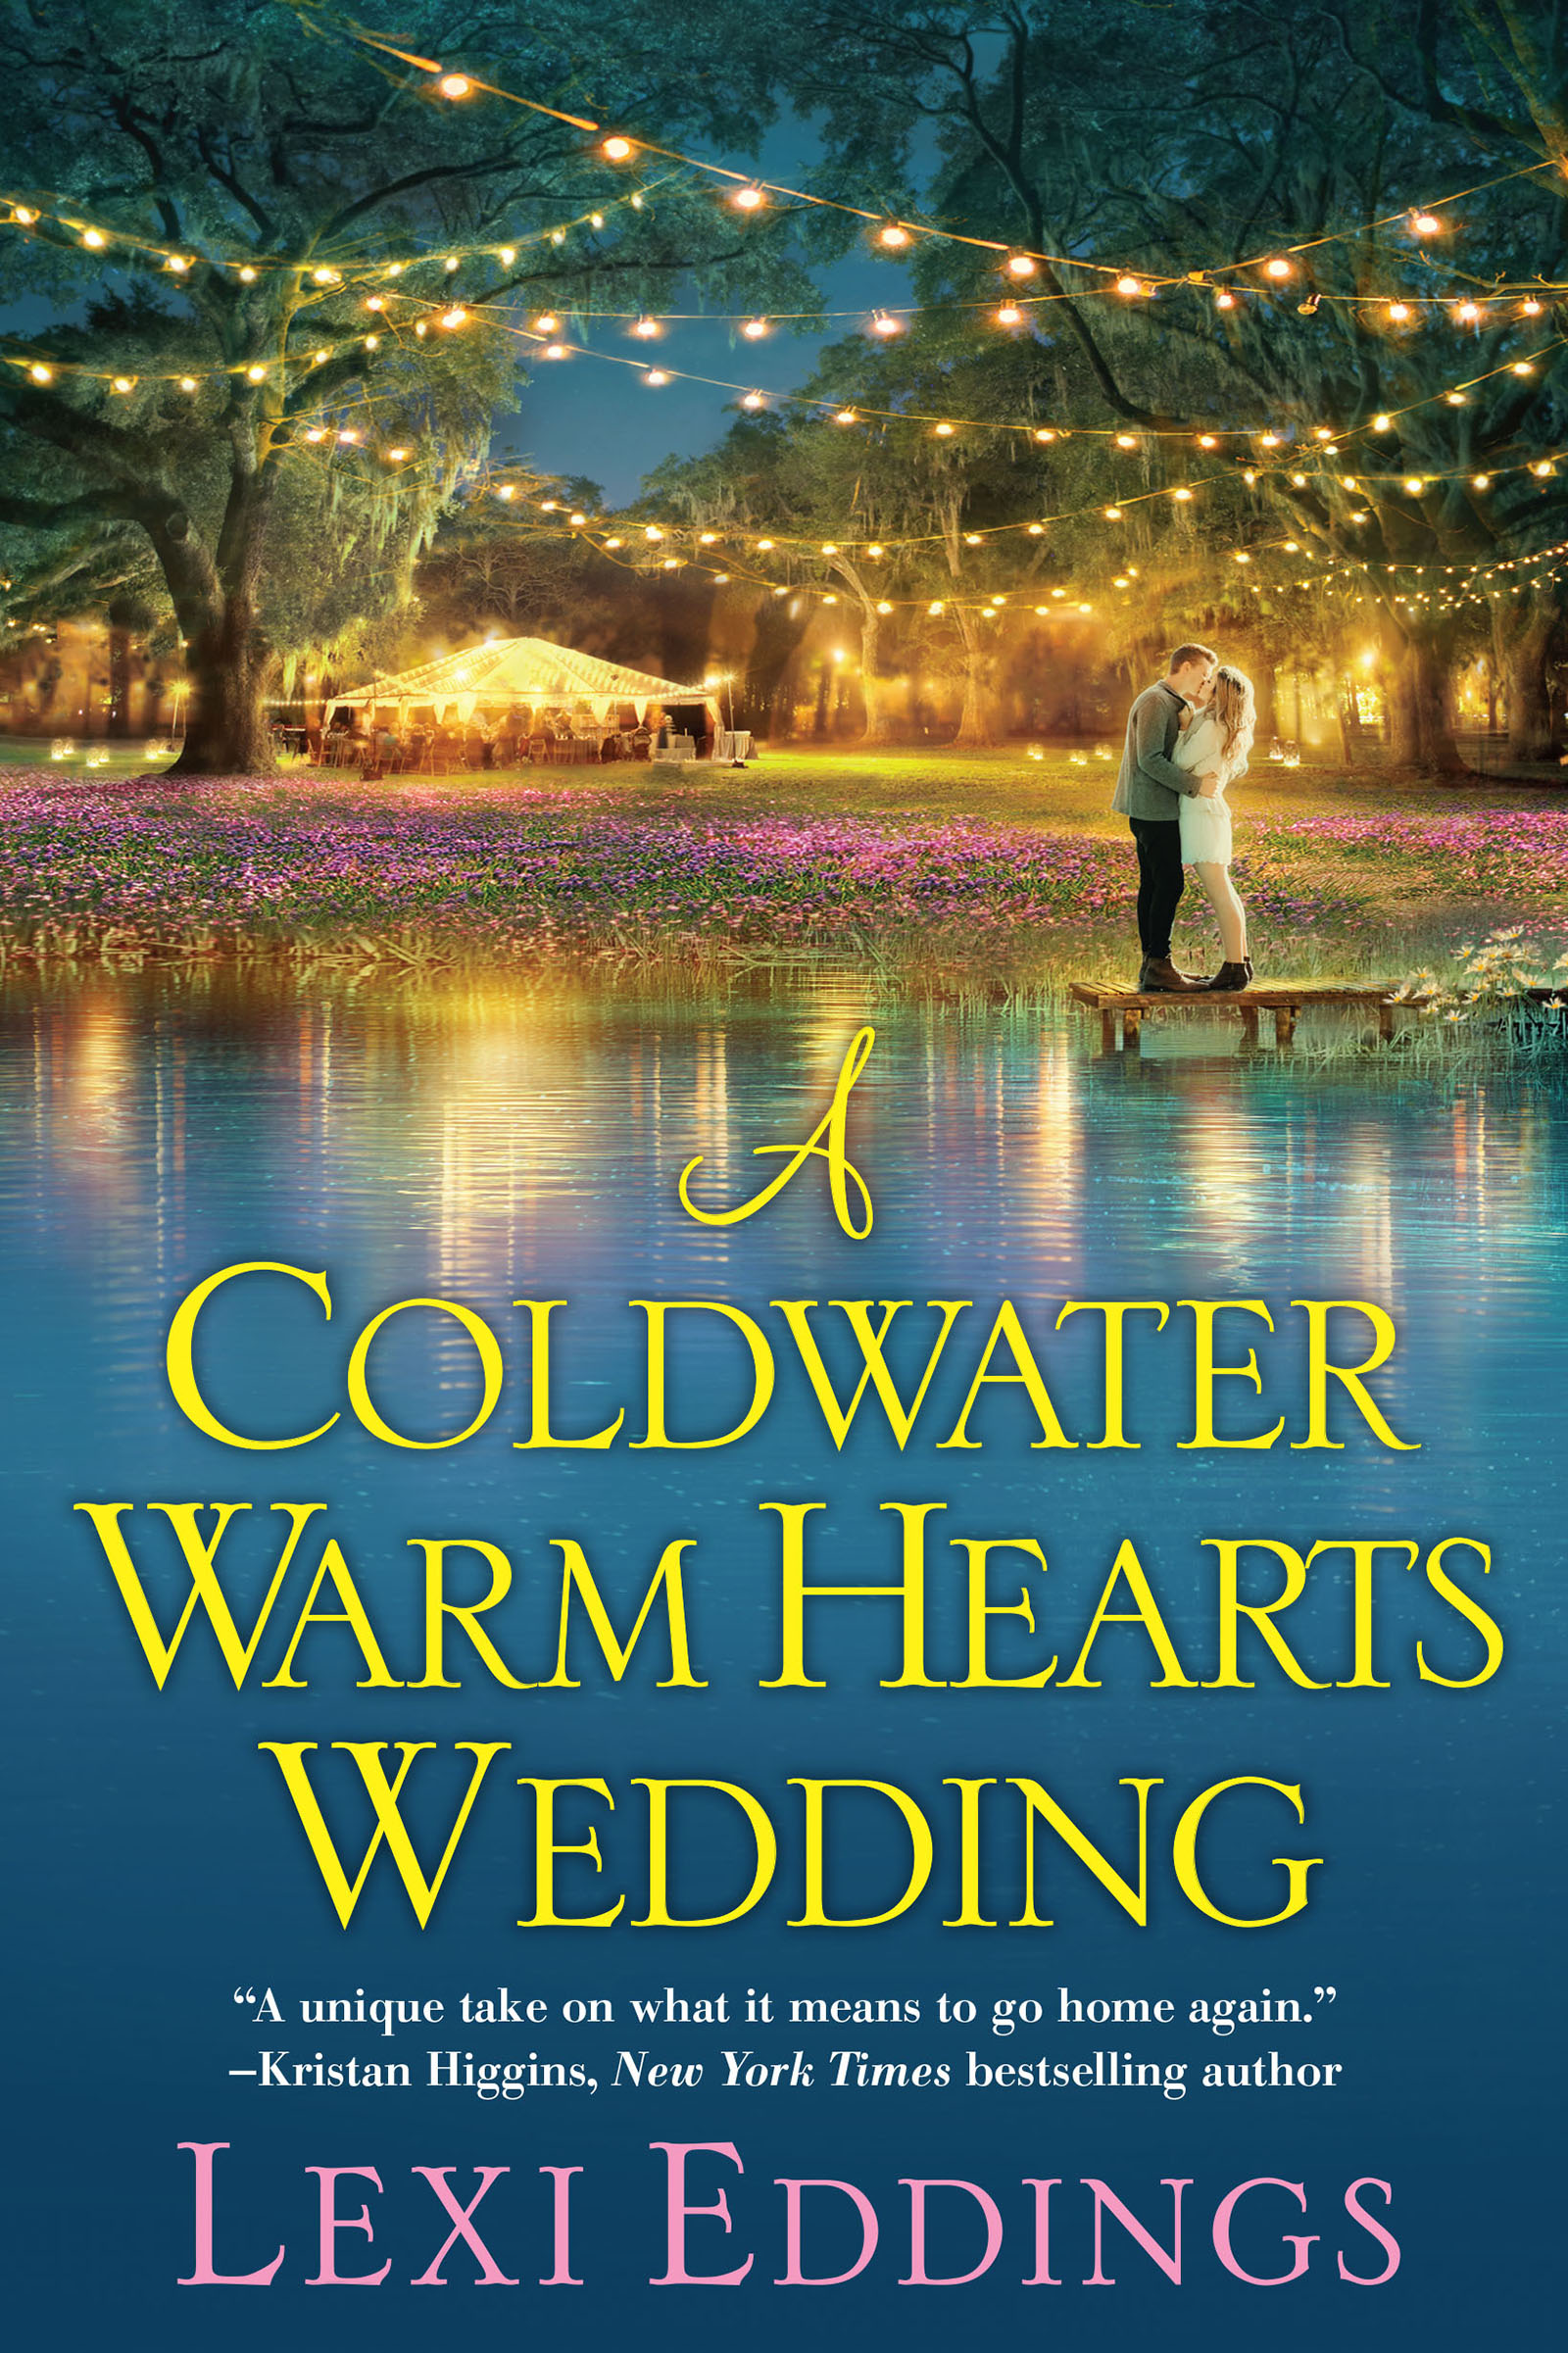 A coldwater warm hearts wedding cover image